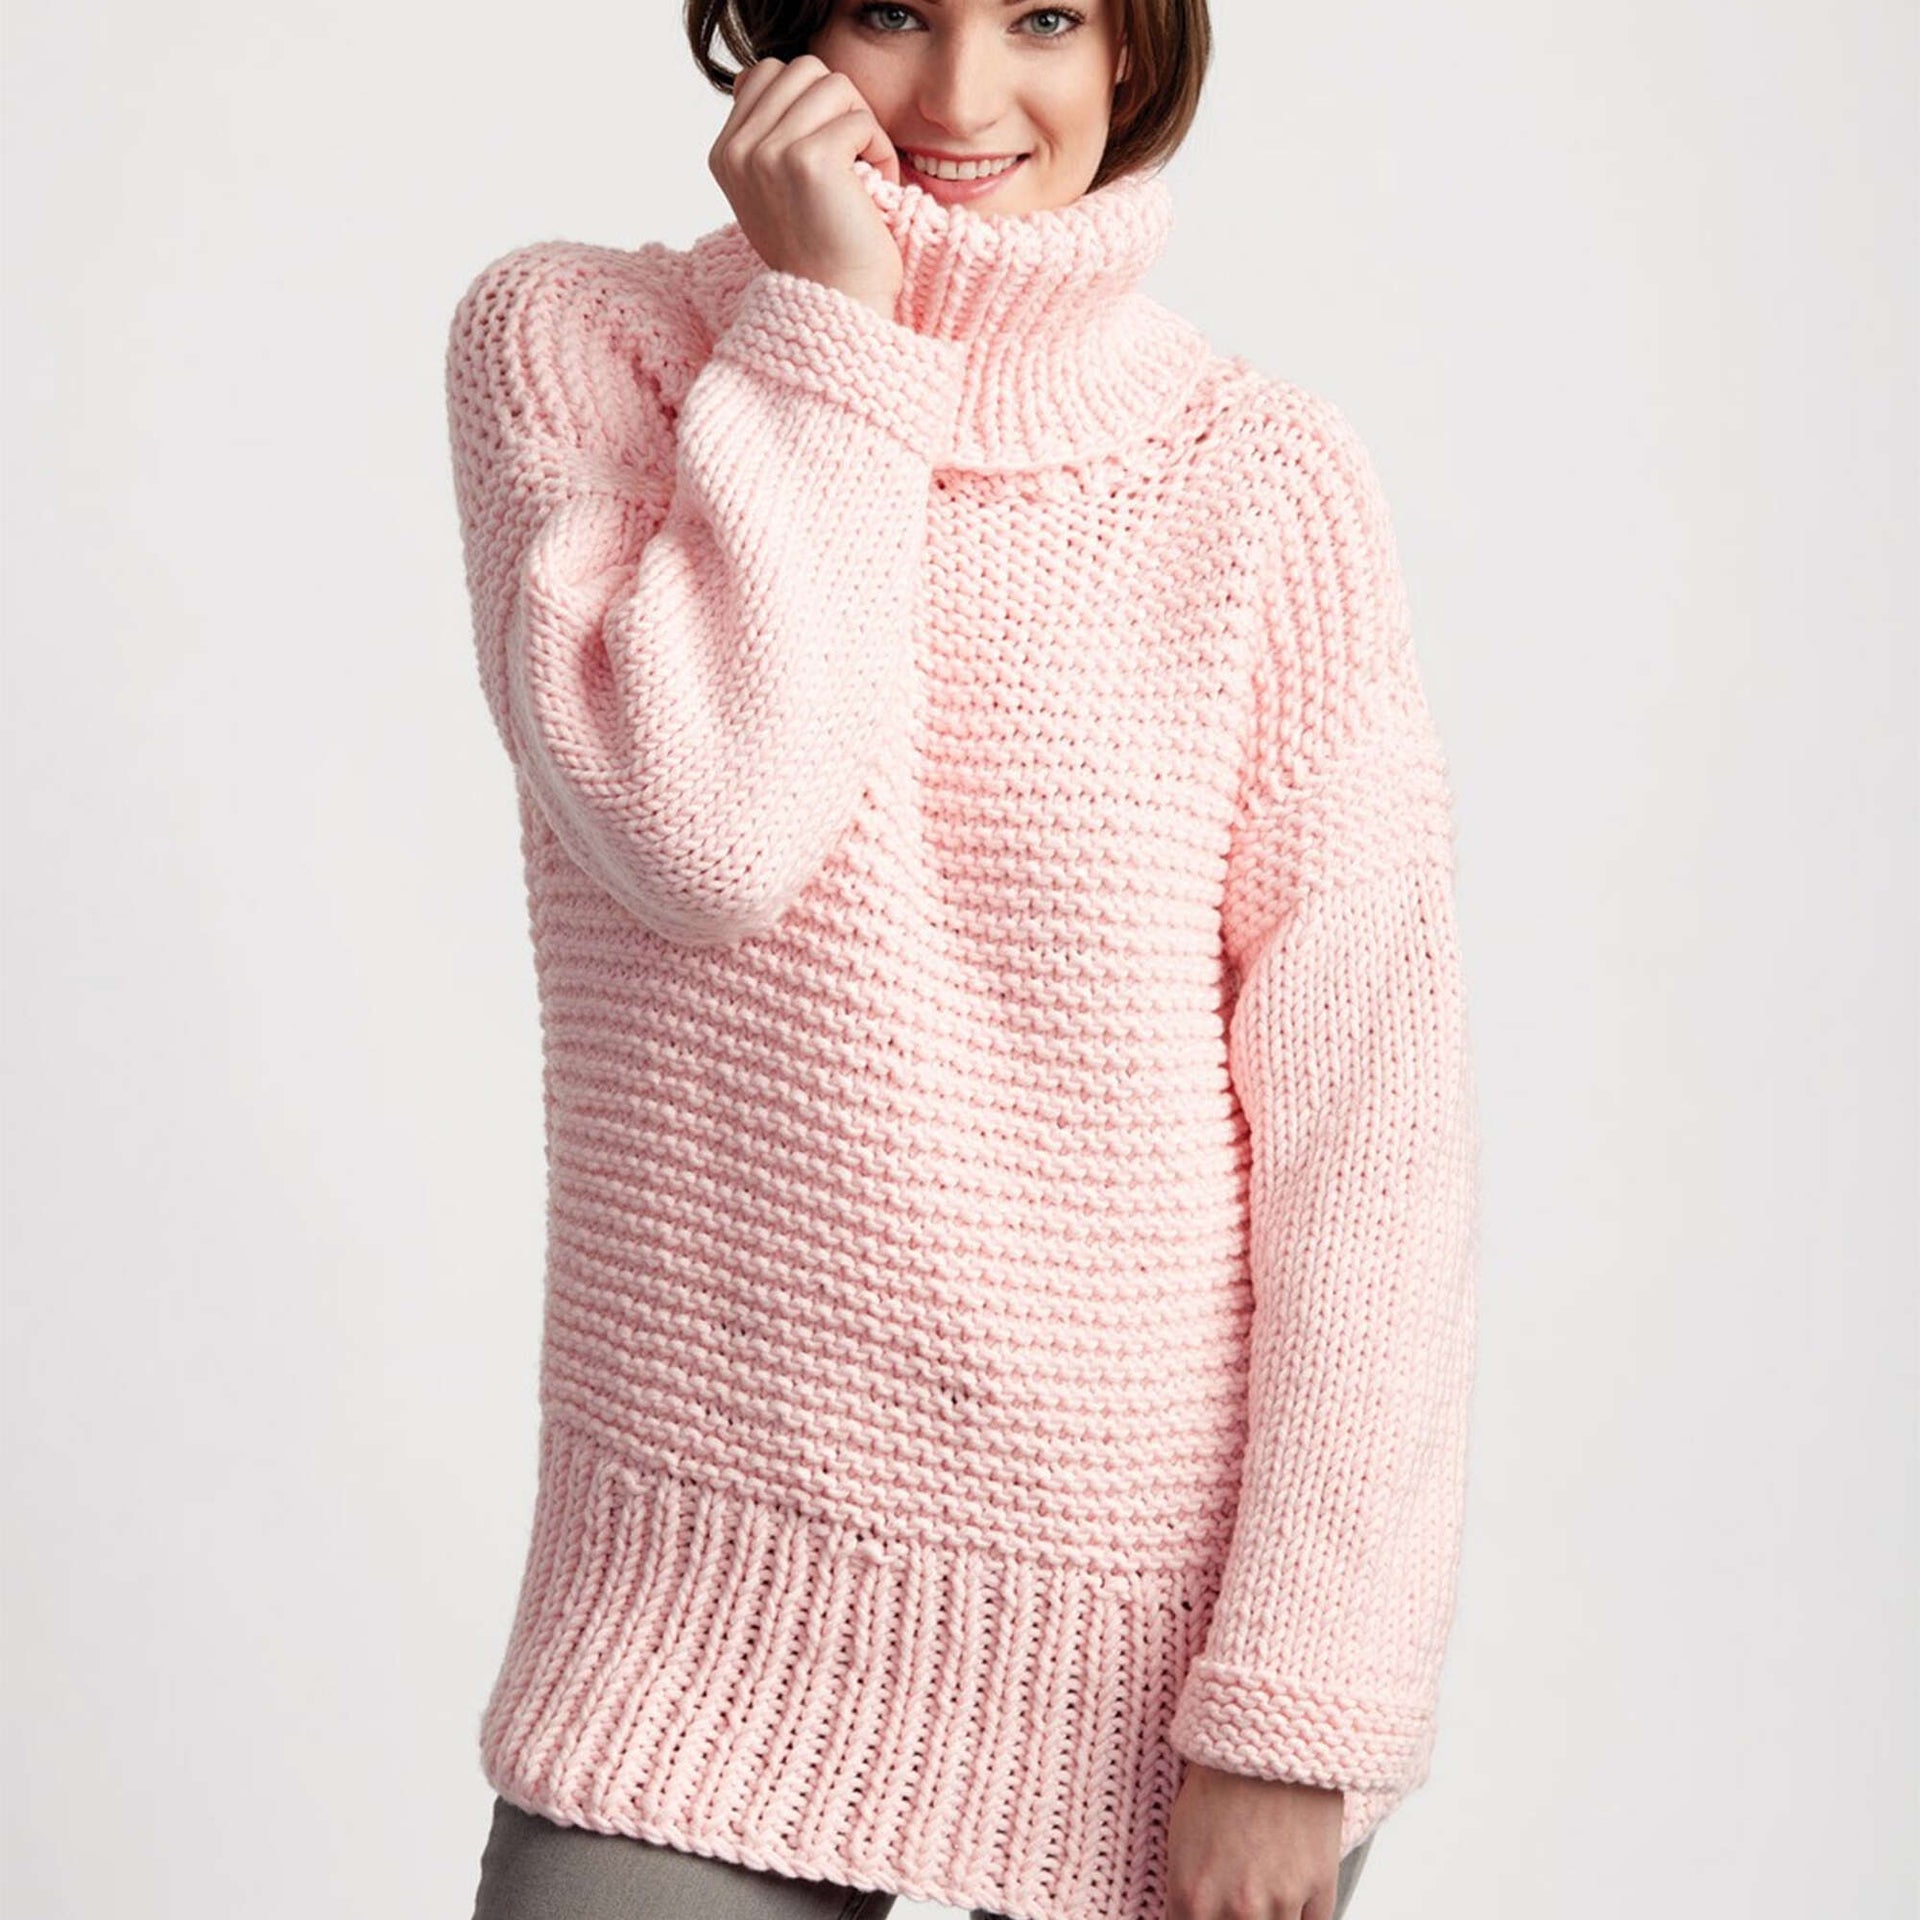 Extra Yarn - pg. 2a - Annabell's Sweater (PRINT) - Nucleus